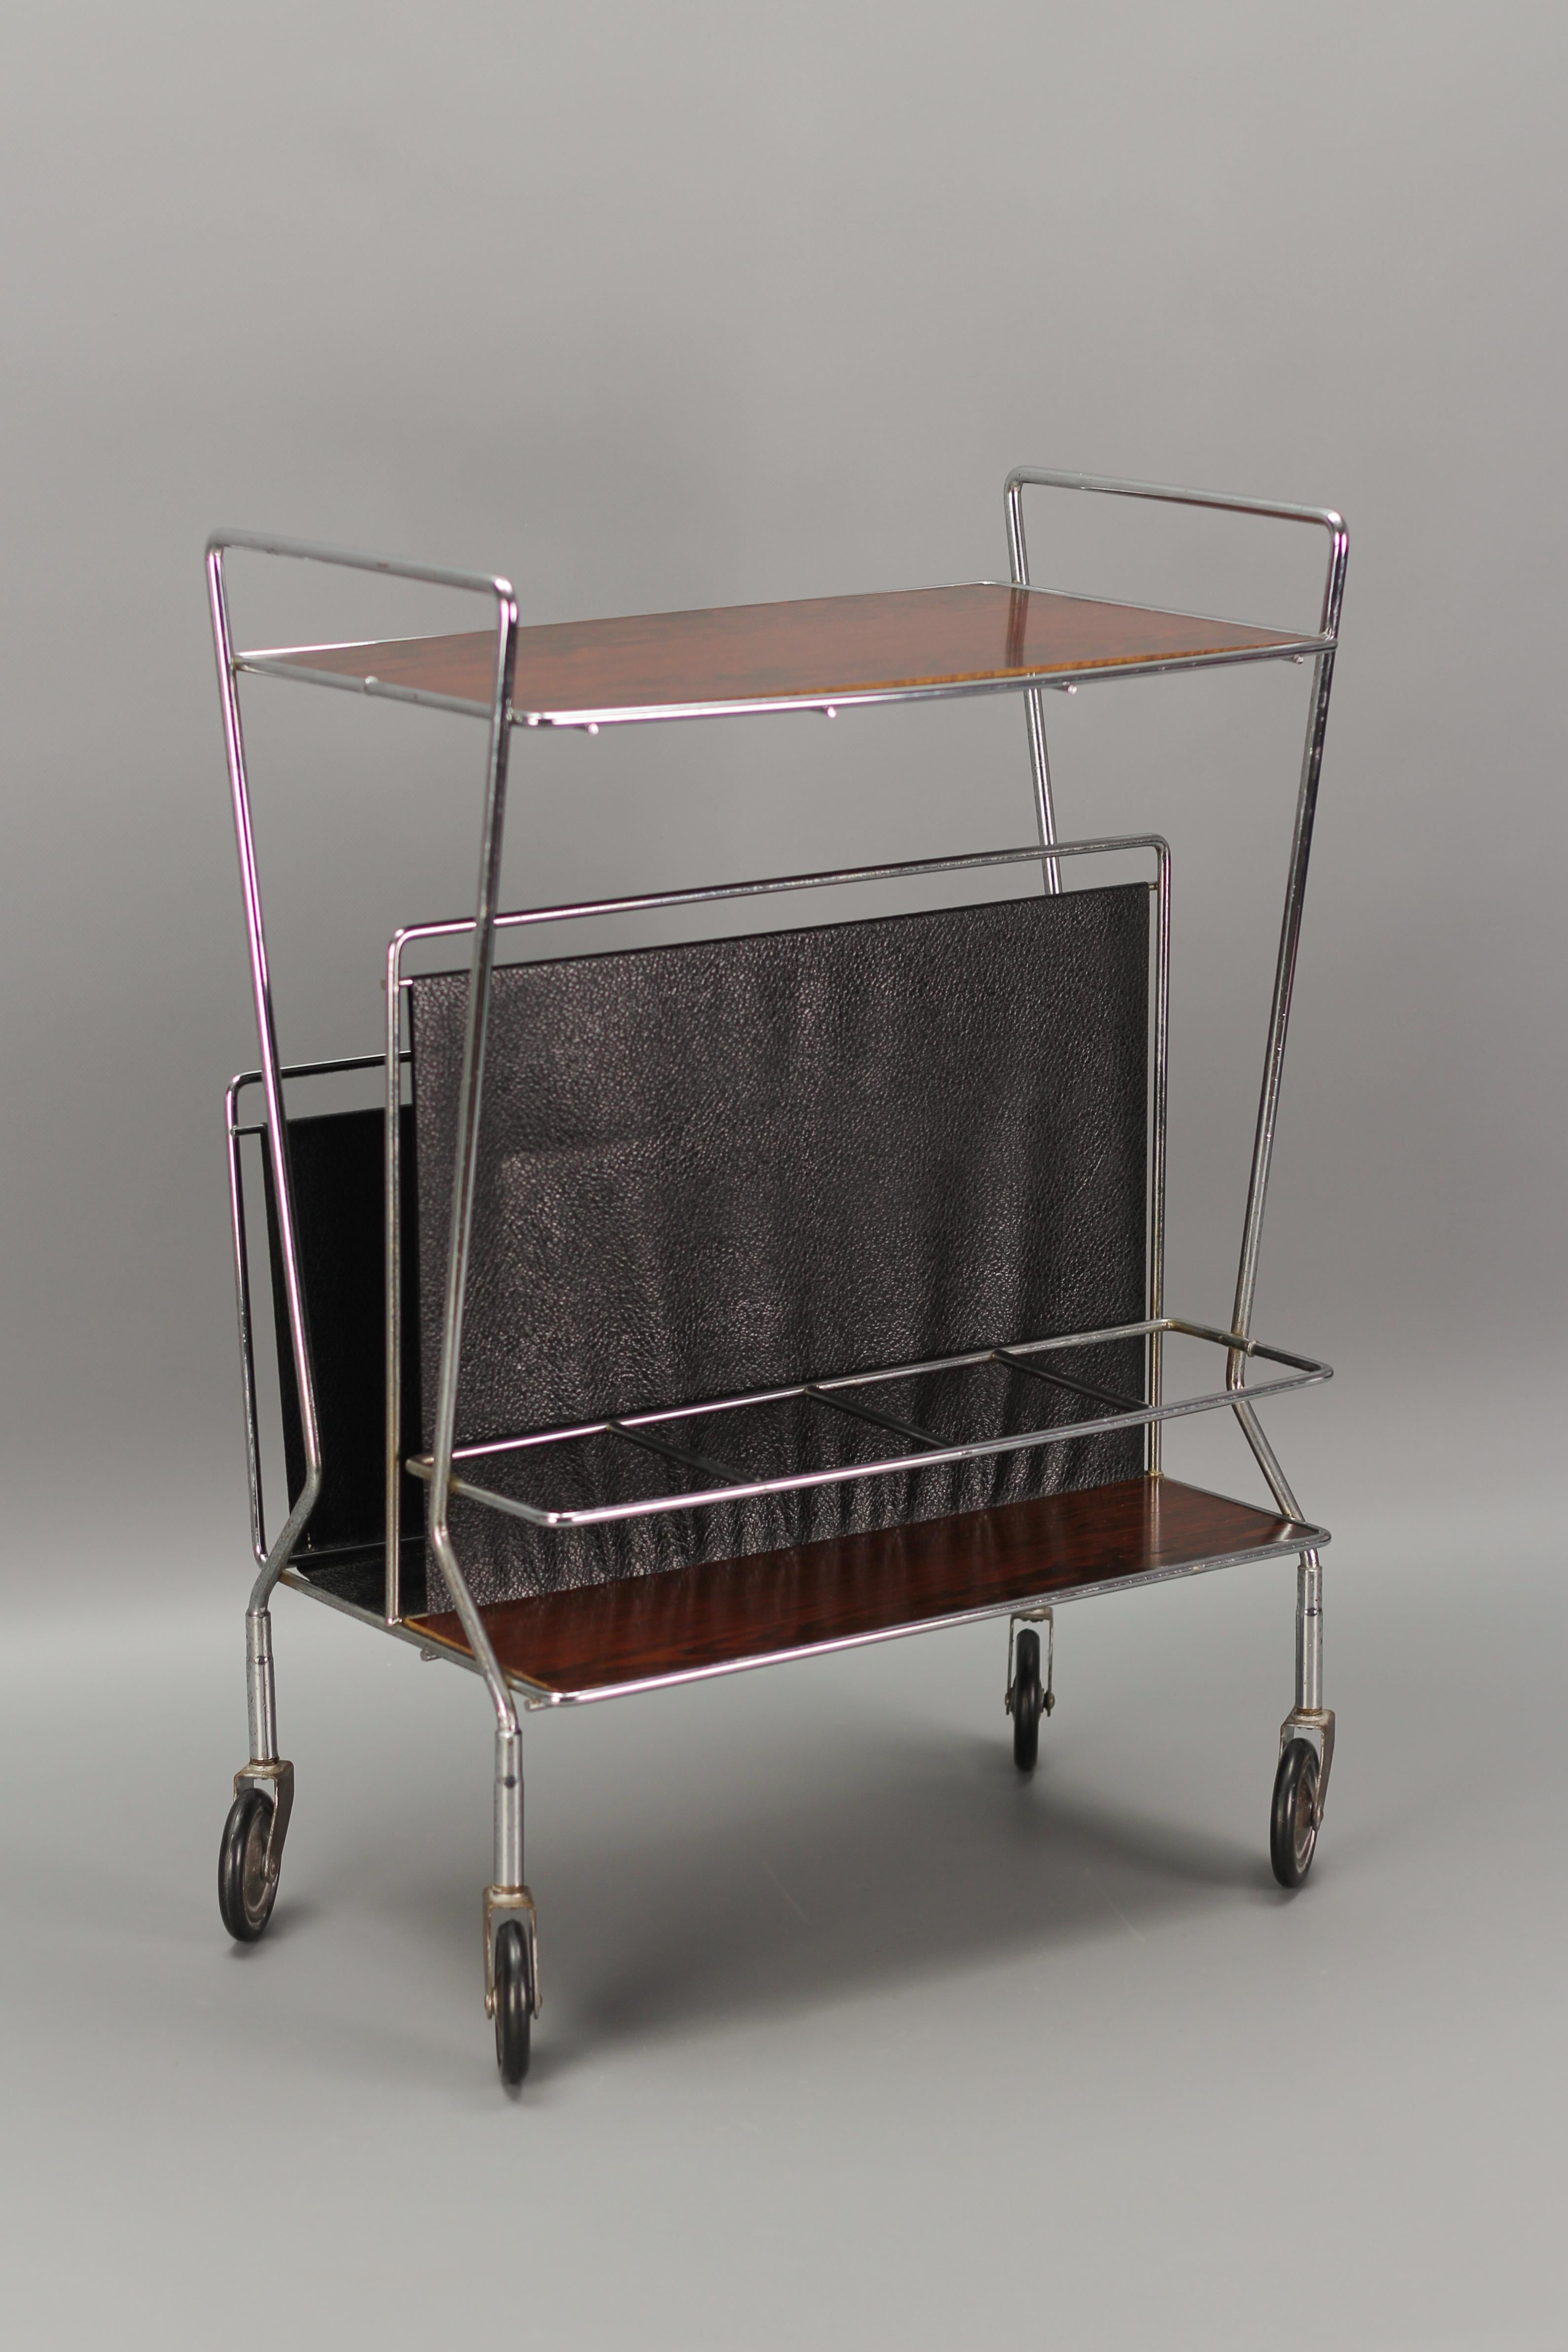 Mid-Century Modern bar cart, trolley, or side table, Germany, 1970s. This elegant vintage bar cart features a chromed metal frame, one top shelf, a compartment for magazines, and storage for bottles. 
Dimensions: height: 60 cm / 23.62 in; width: 47